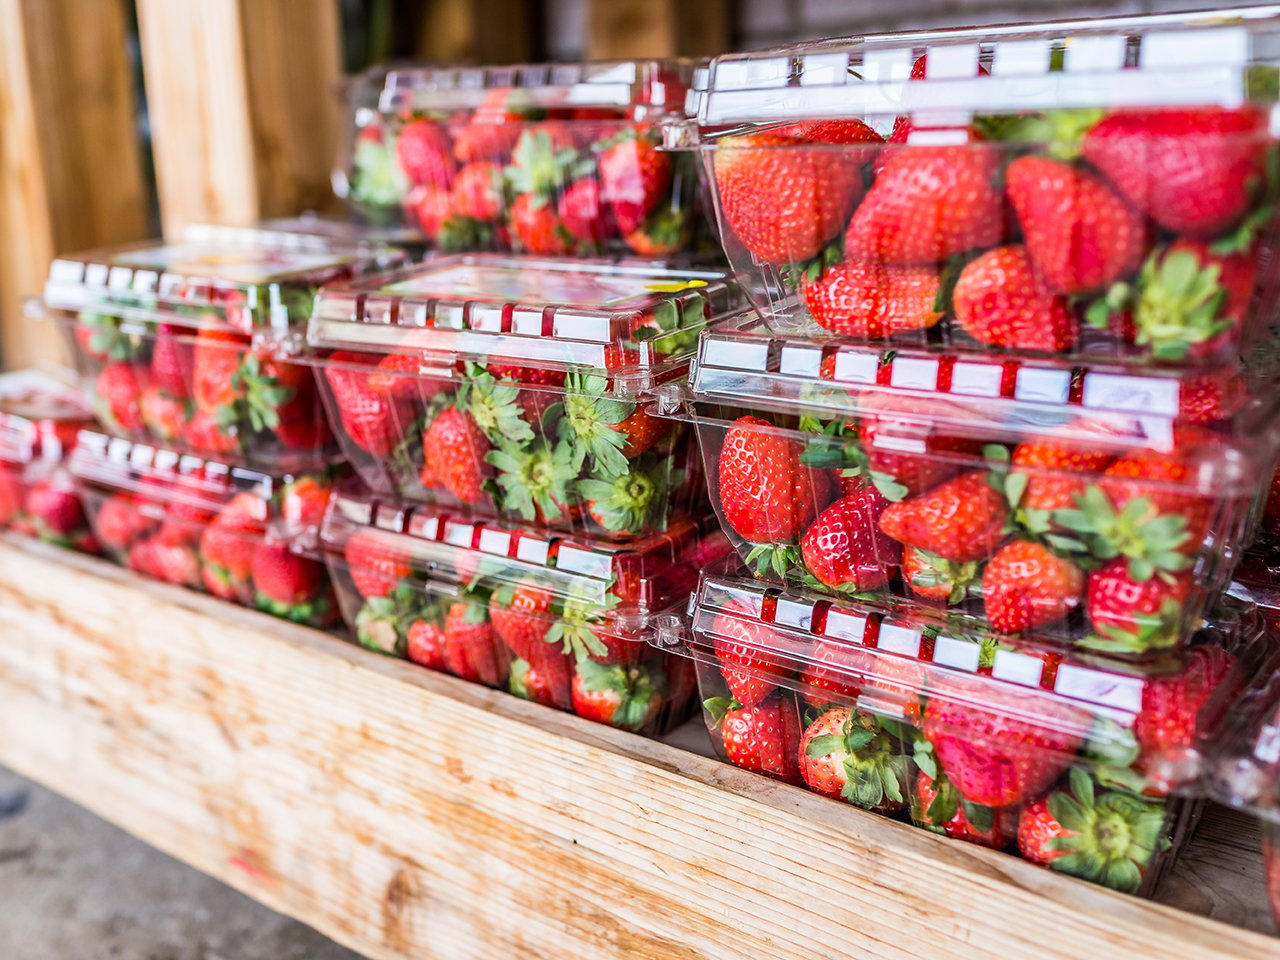 reuse single-use plastics: closeup of many strawberries in plastic clamshell boxes on display in wooden crate